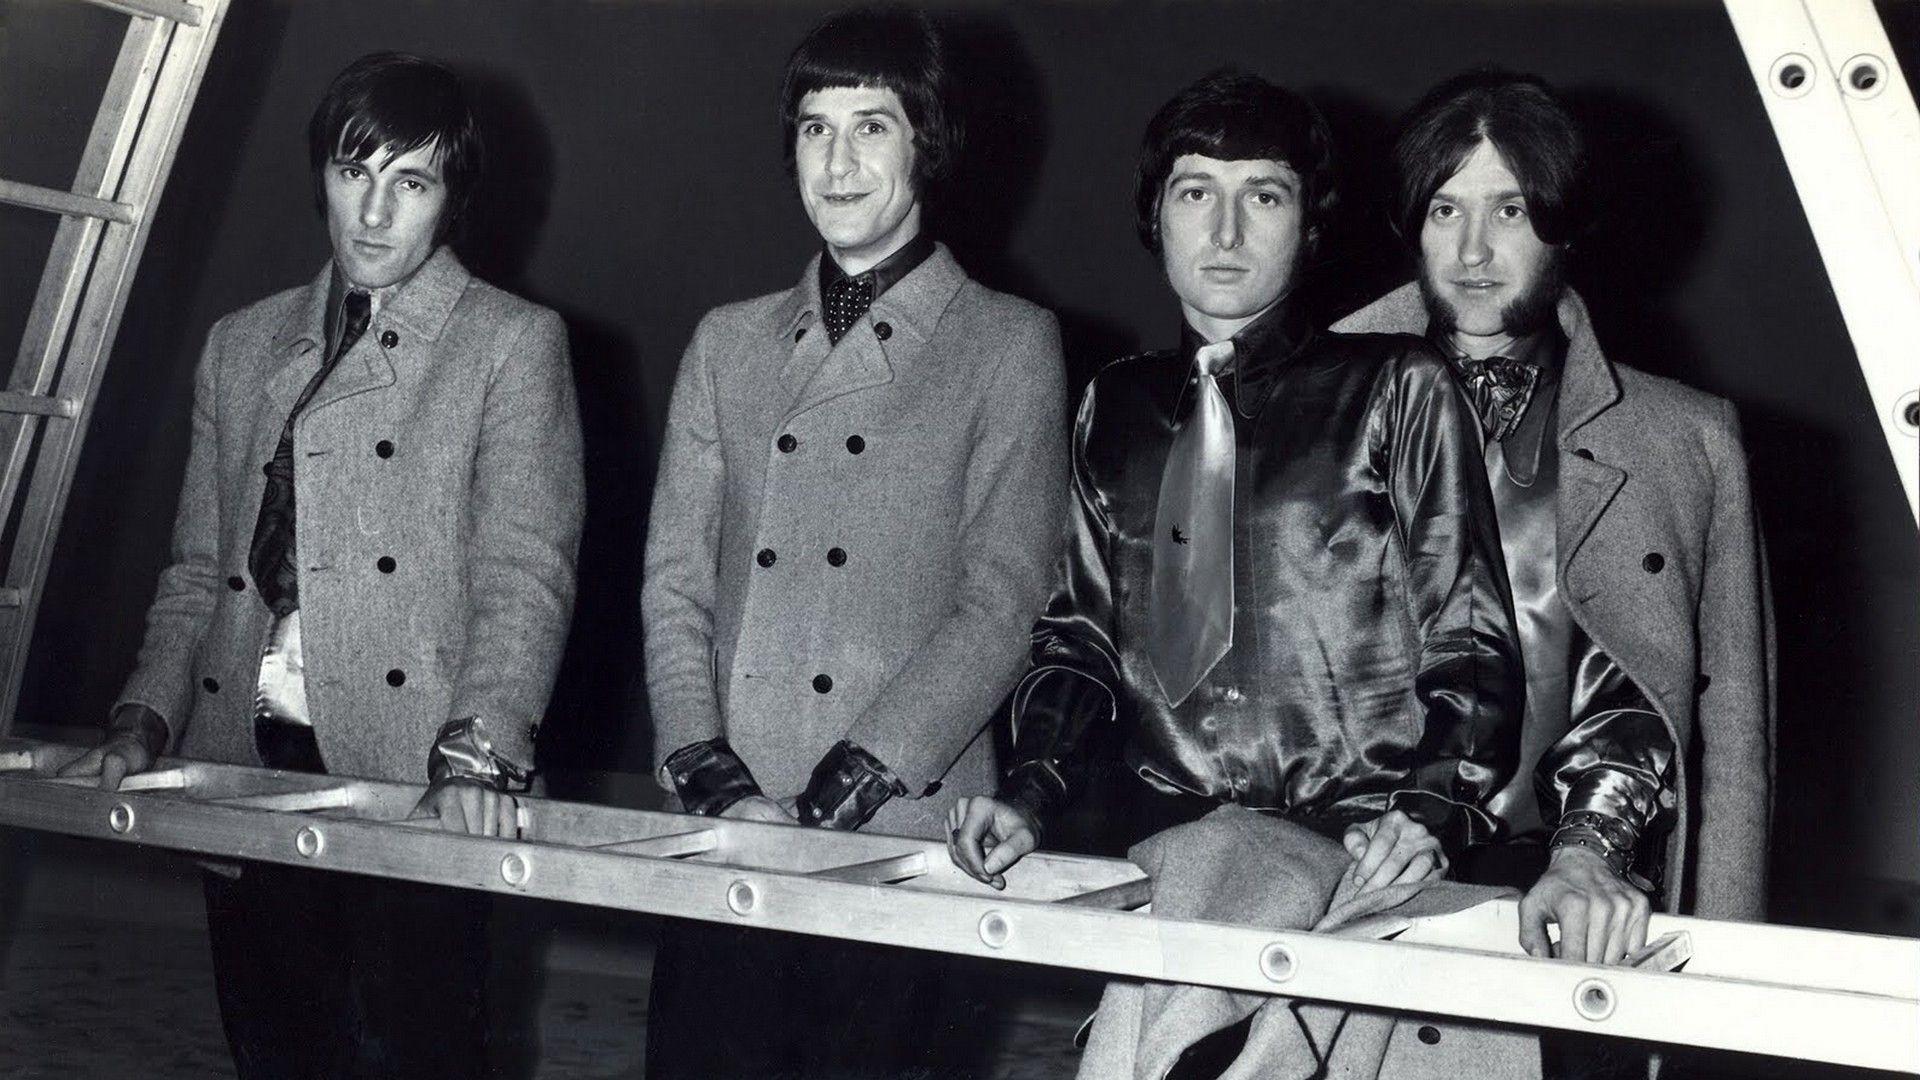 Download Wallpaper 1920x1080 the kinks, coats, smile, ladder, faces